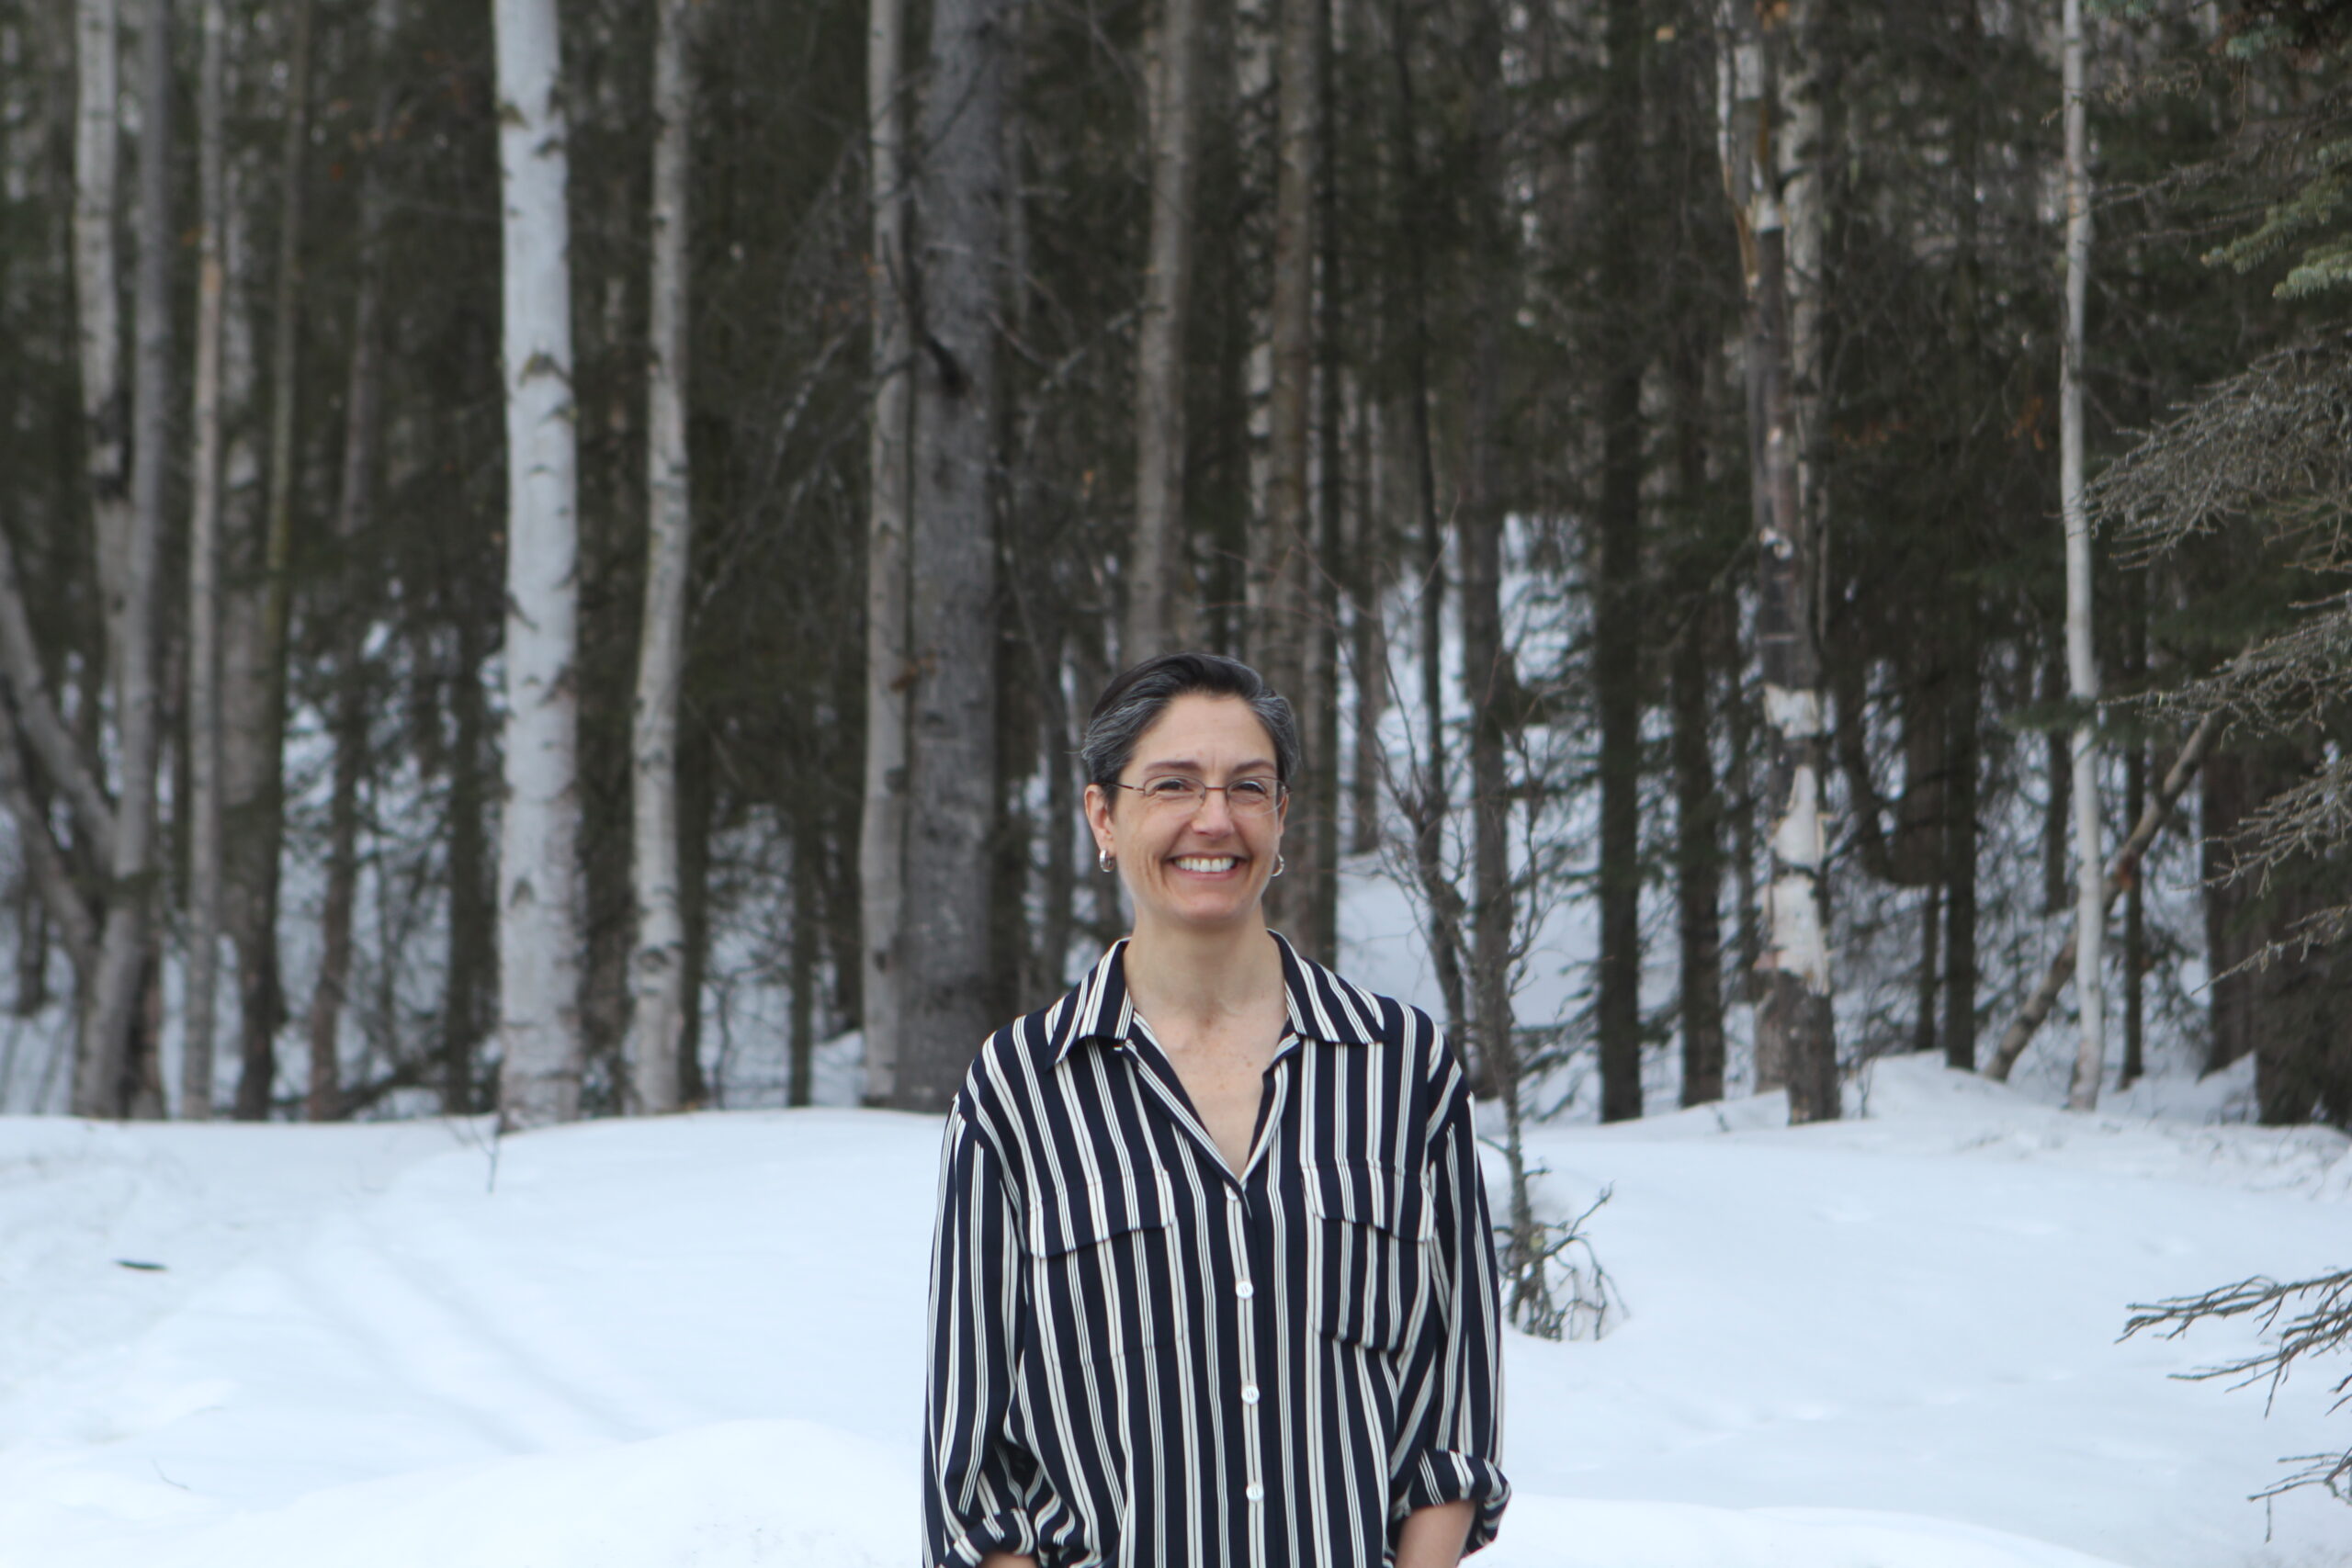 A woman in a striped shirt stands in front of snow and trees.